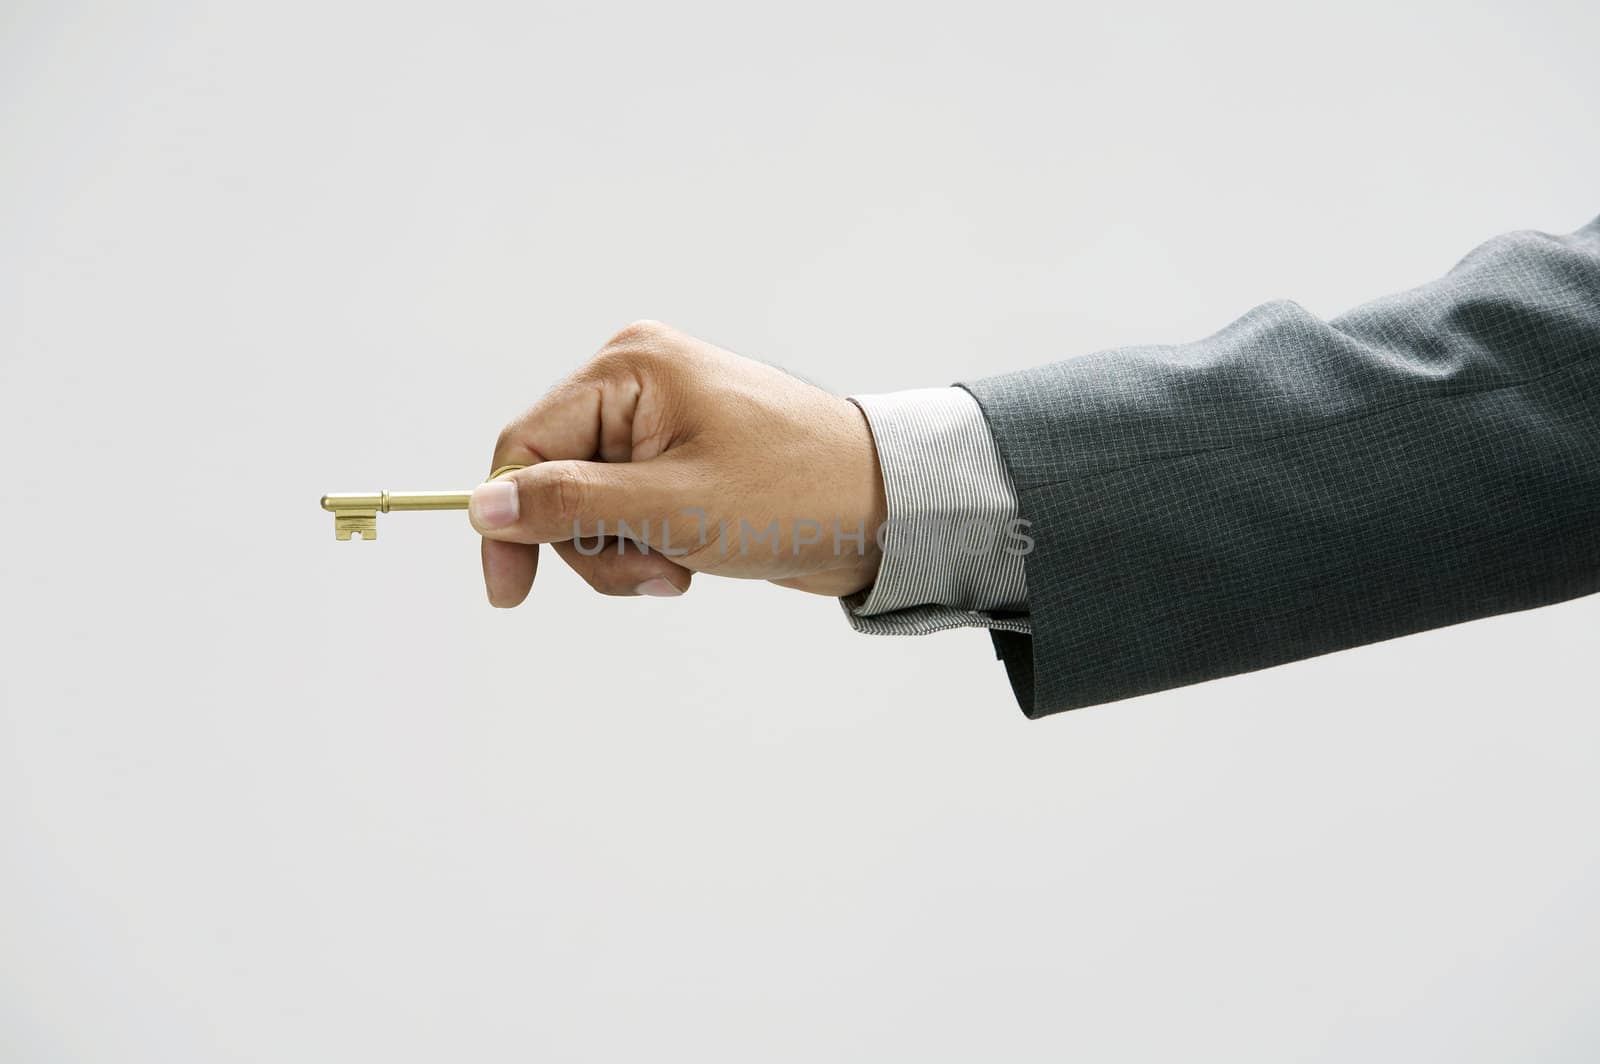 man showing a key with  the white background